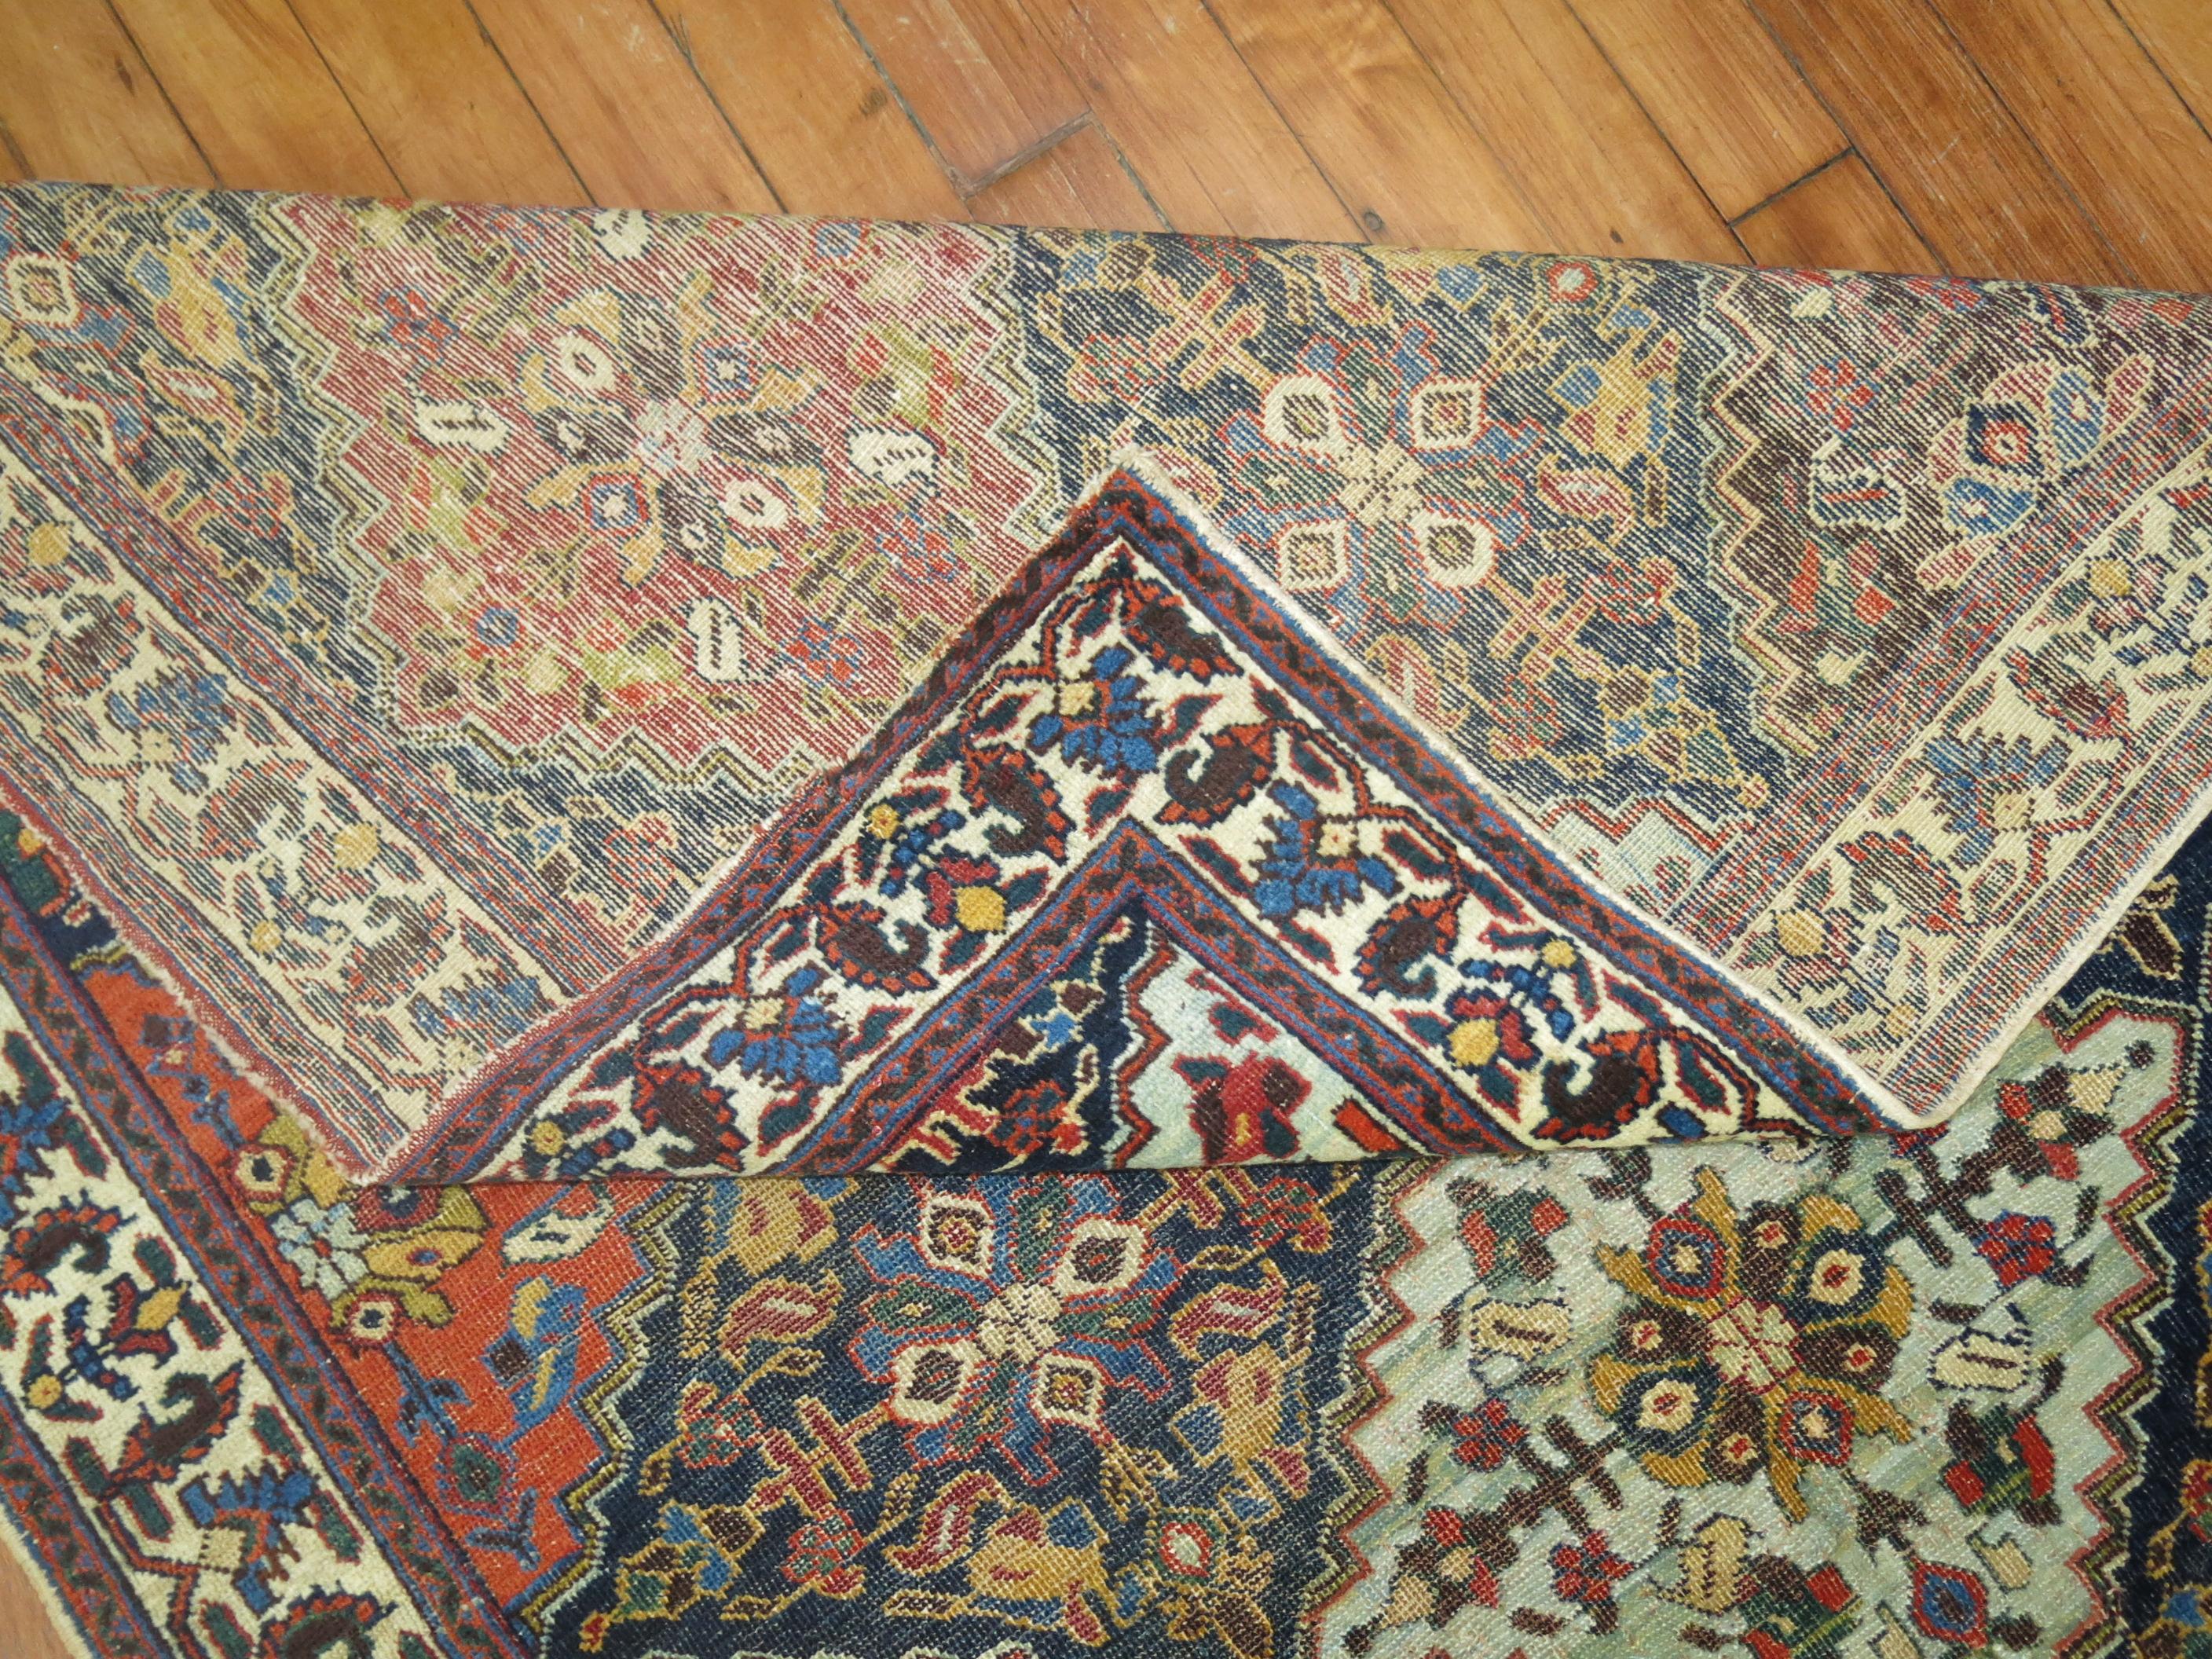 Hand-Woven Antique Persian Square Rug